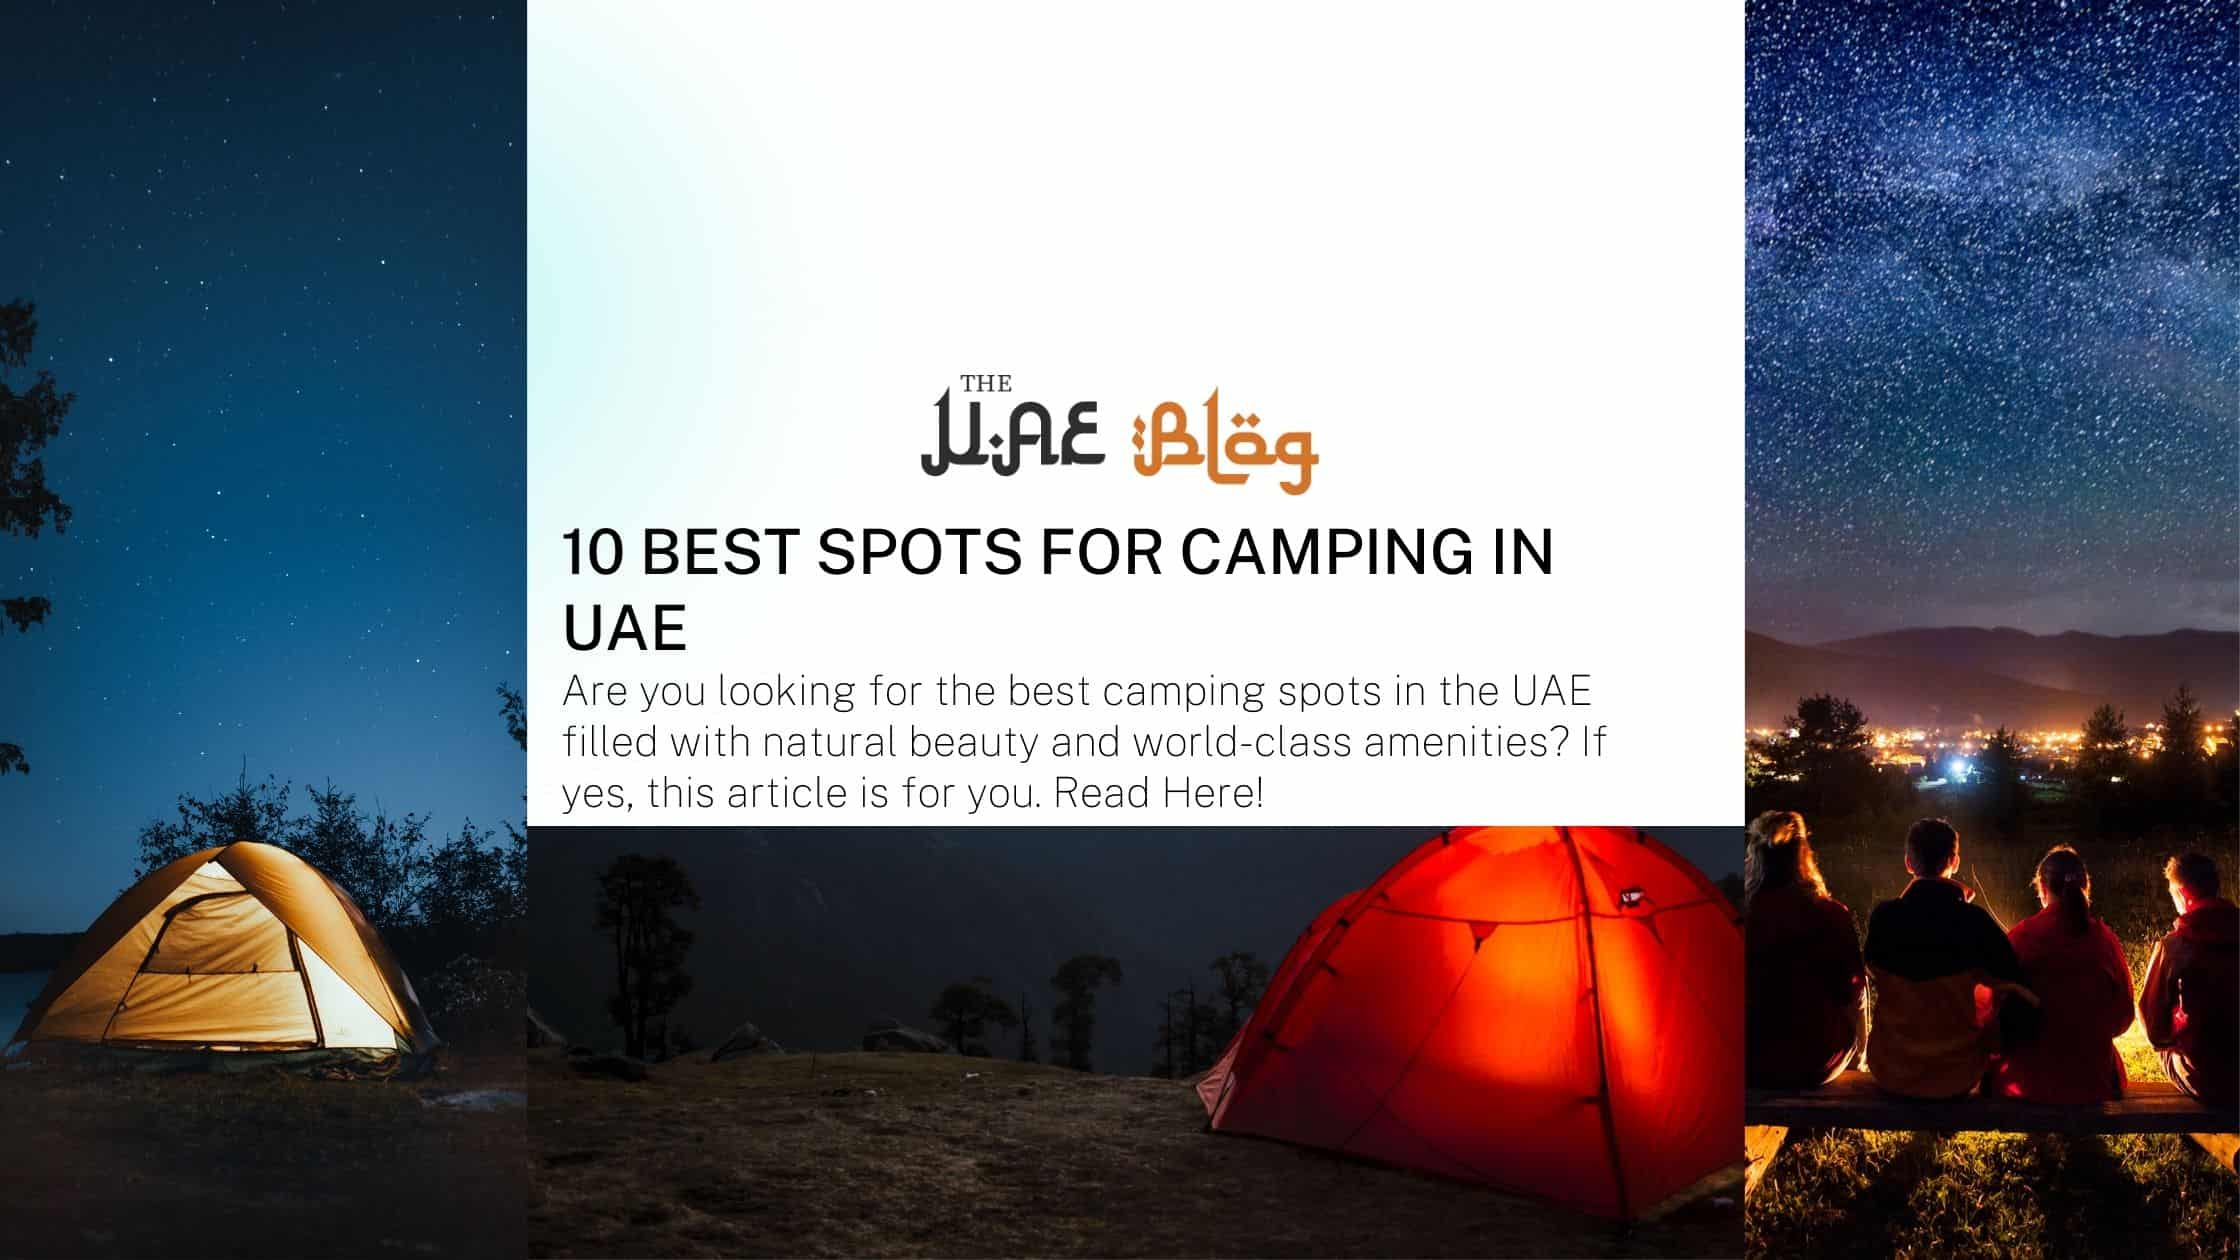 10 Best Spots for Camping in UAE